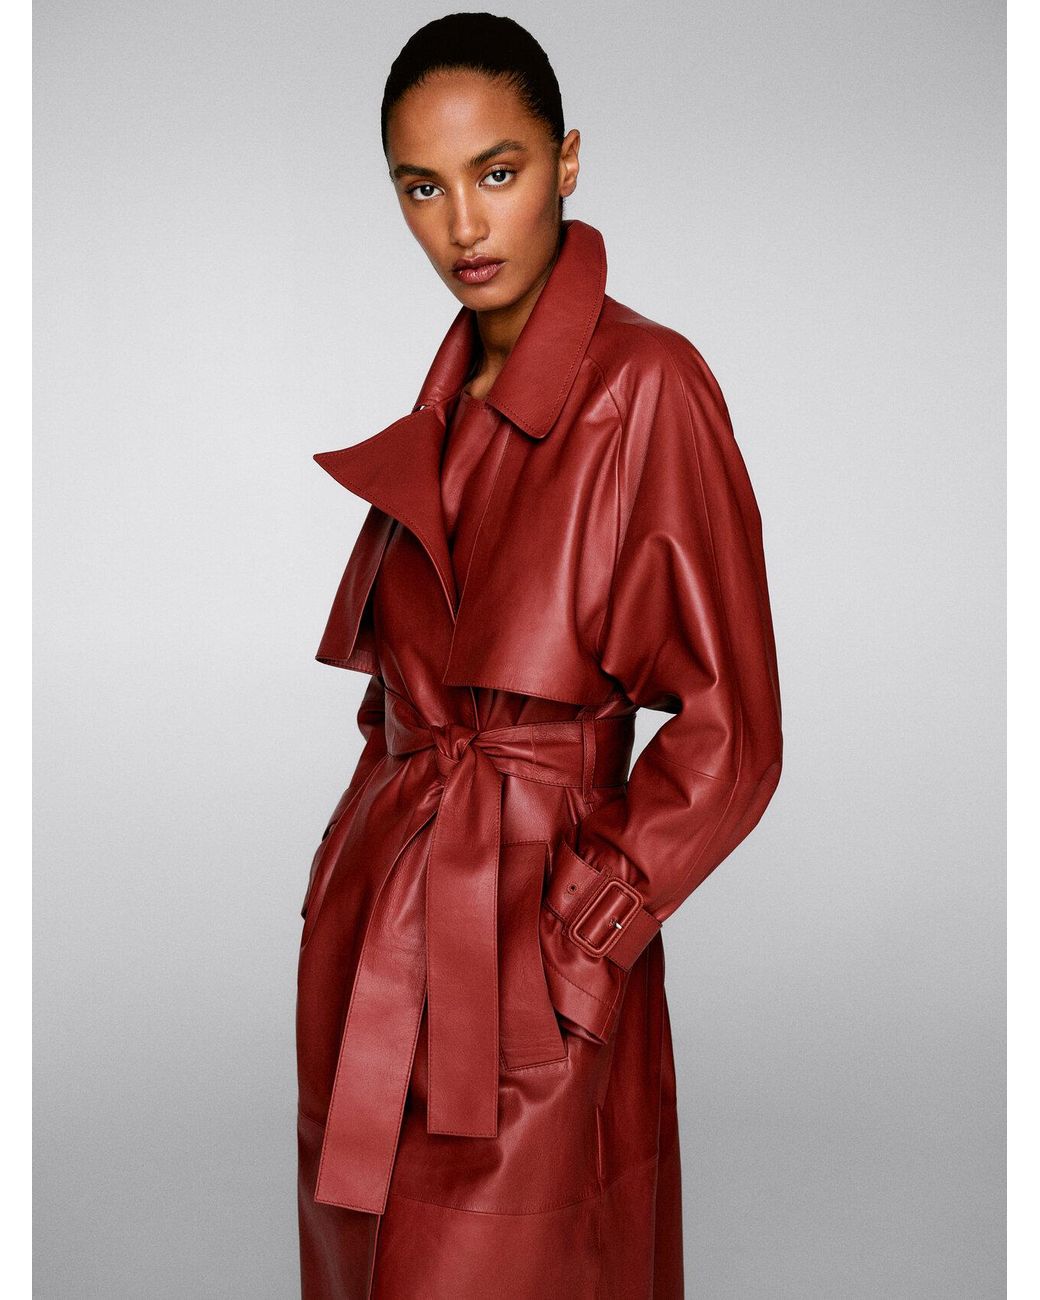 MASSIMO DUTTI Nappa Leather Trench Coat With Belt in Red | Lyst